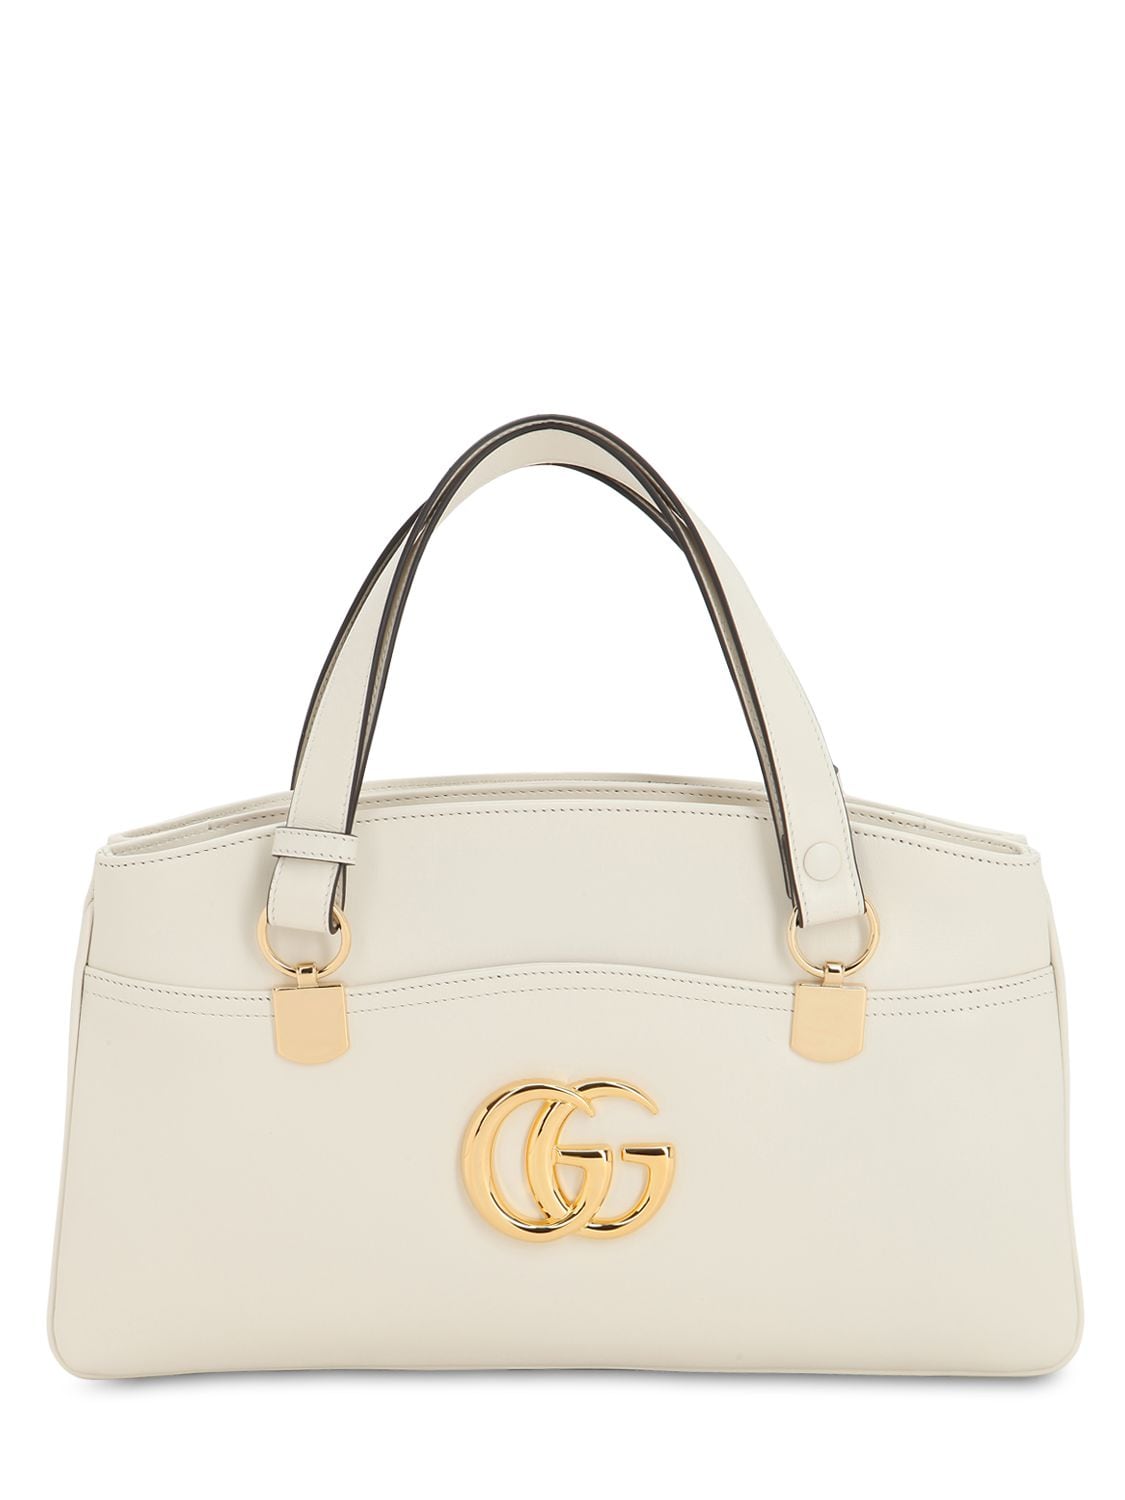 Gucci Arli Smooth Leather Top Handle Bag In White